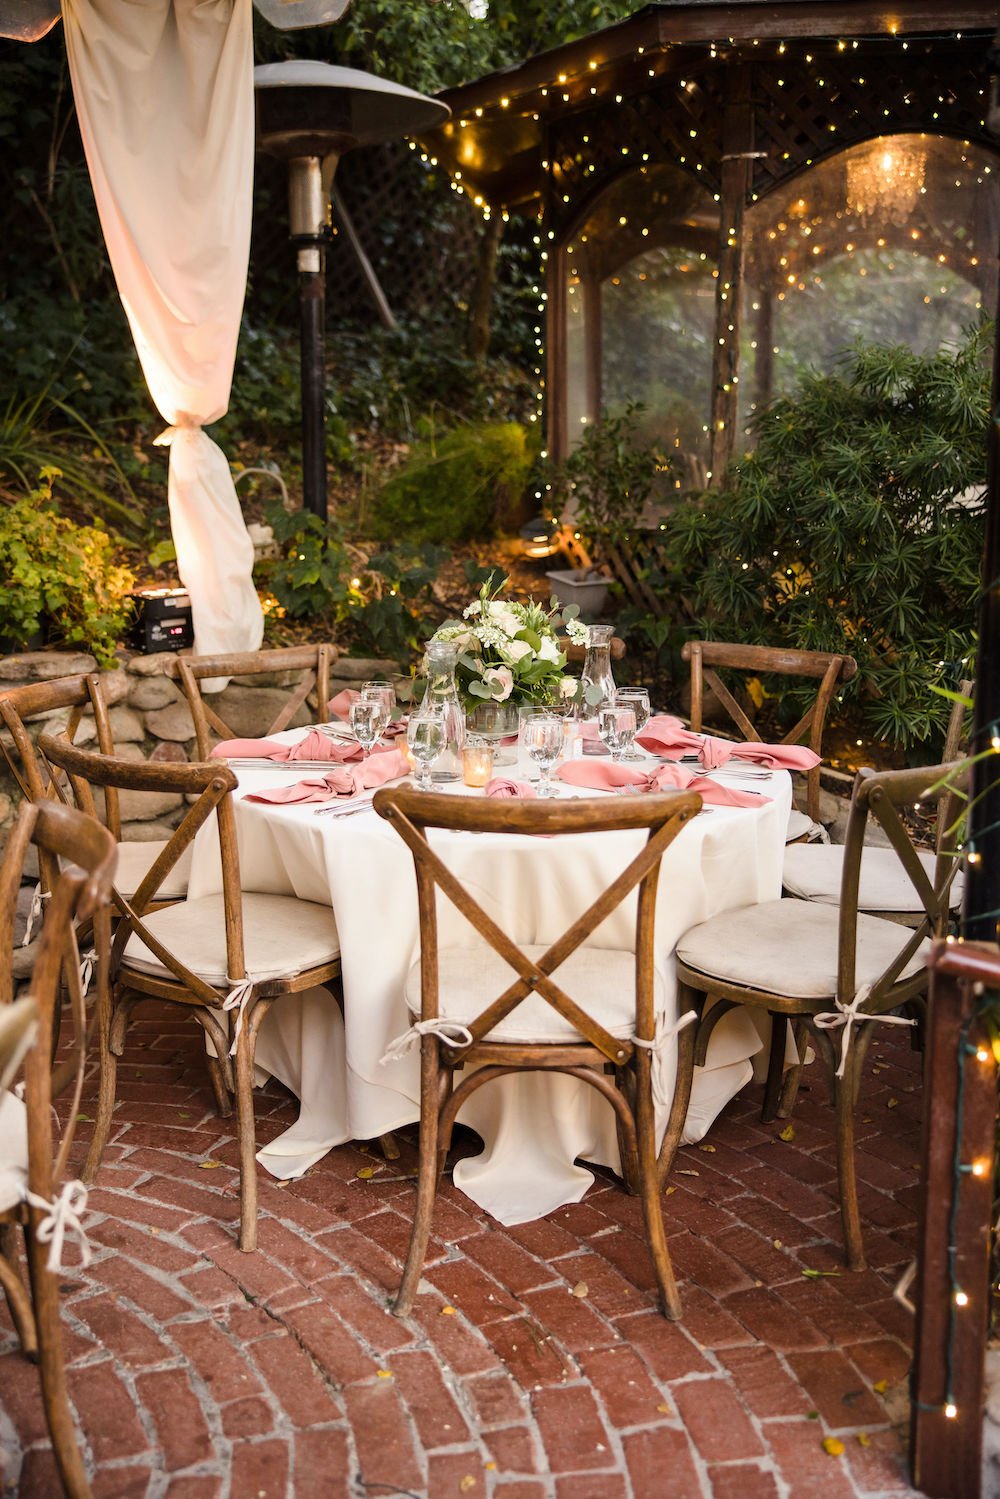 Rustic wedding reception at the Inn at Seventh Ray in Los Angeles.